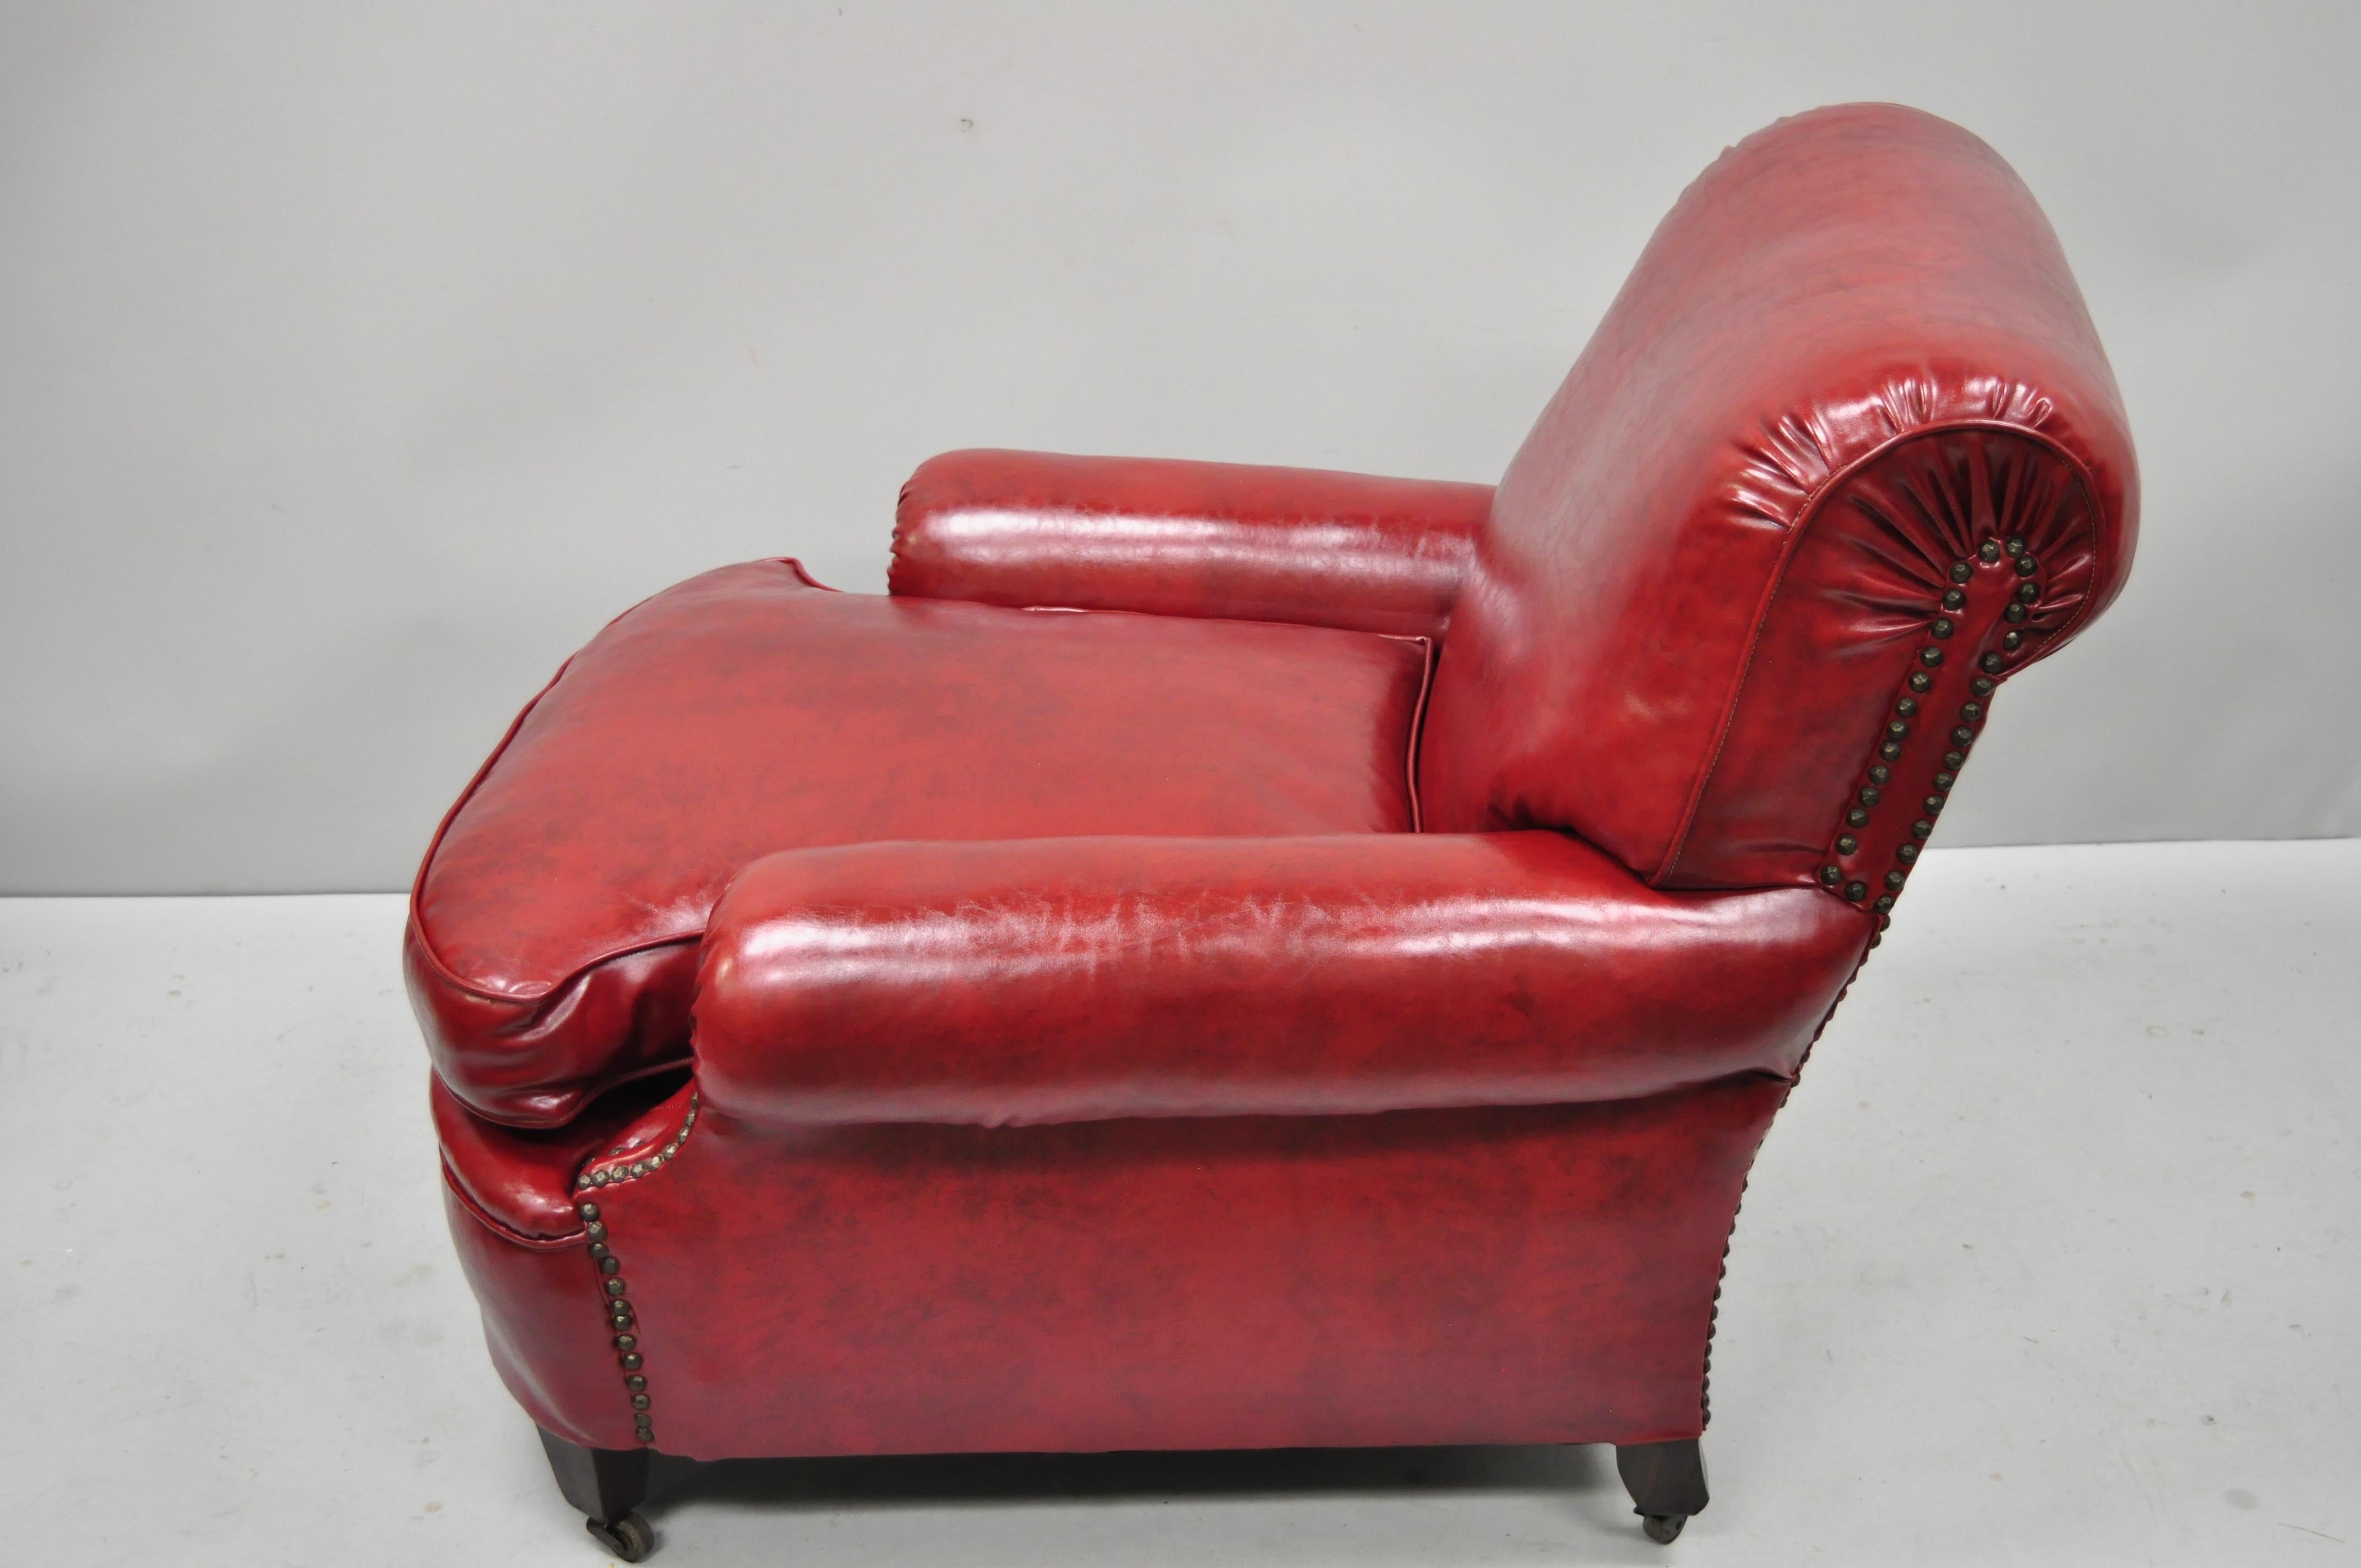 Naugahyde Antique English Regency Style Burgundy Red Vinyl Faux Leather Club Lounge Chair